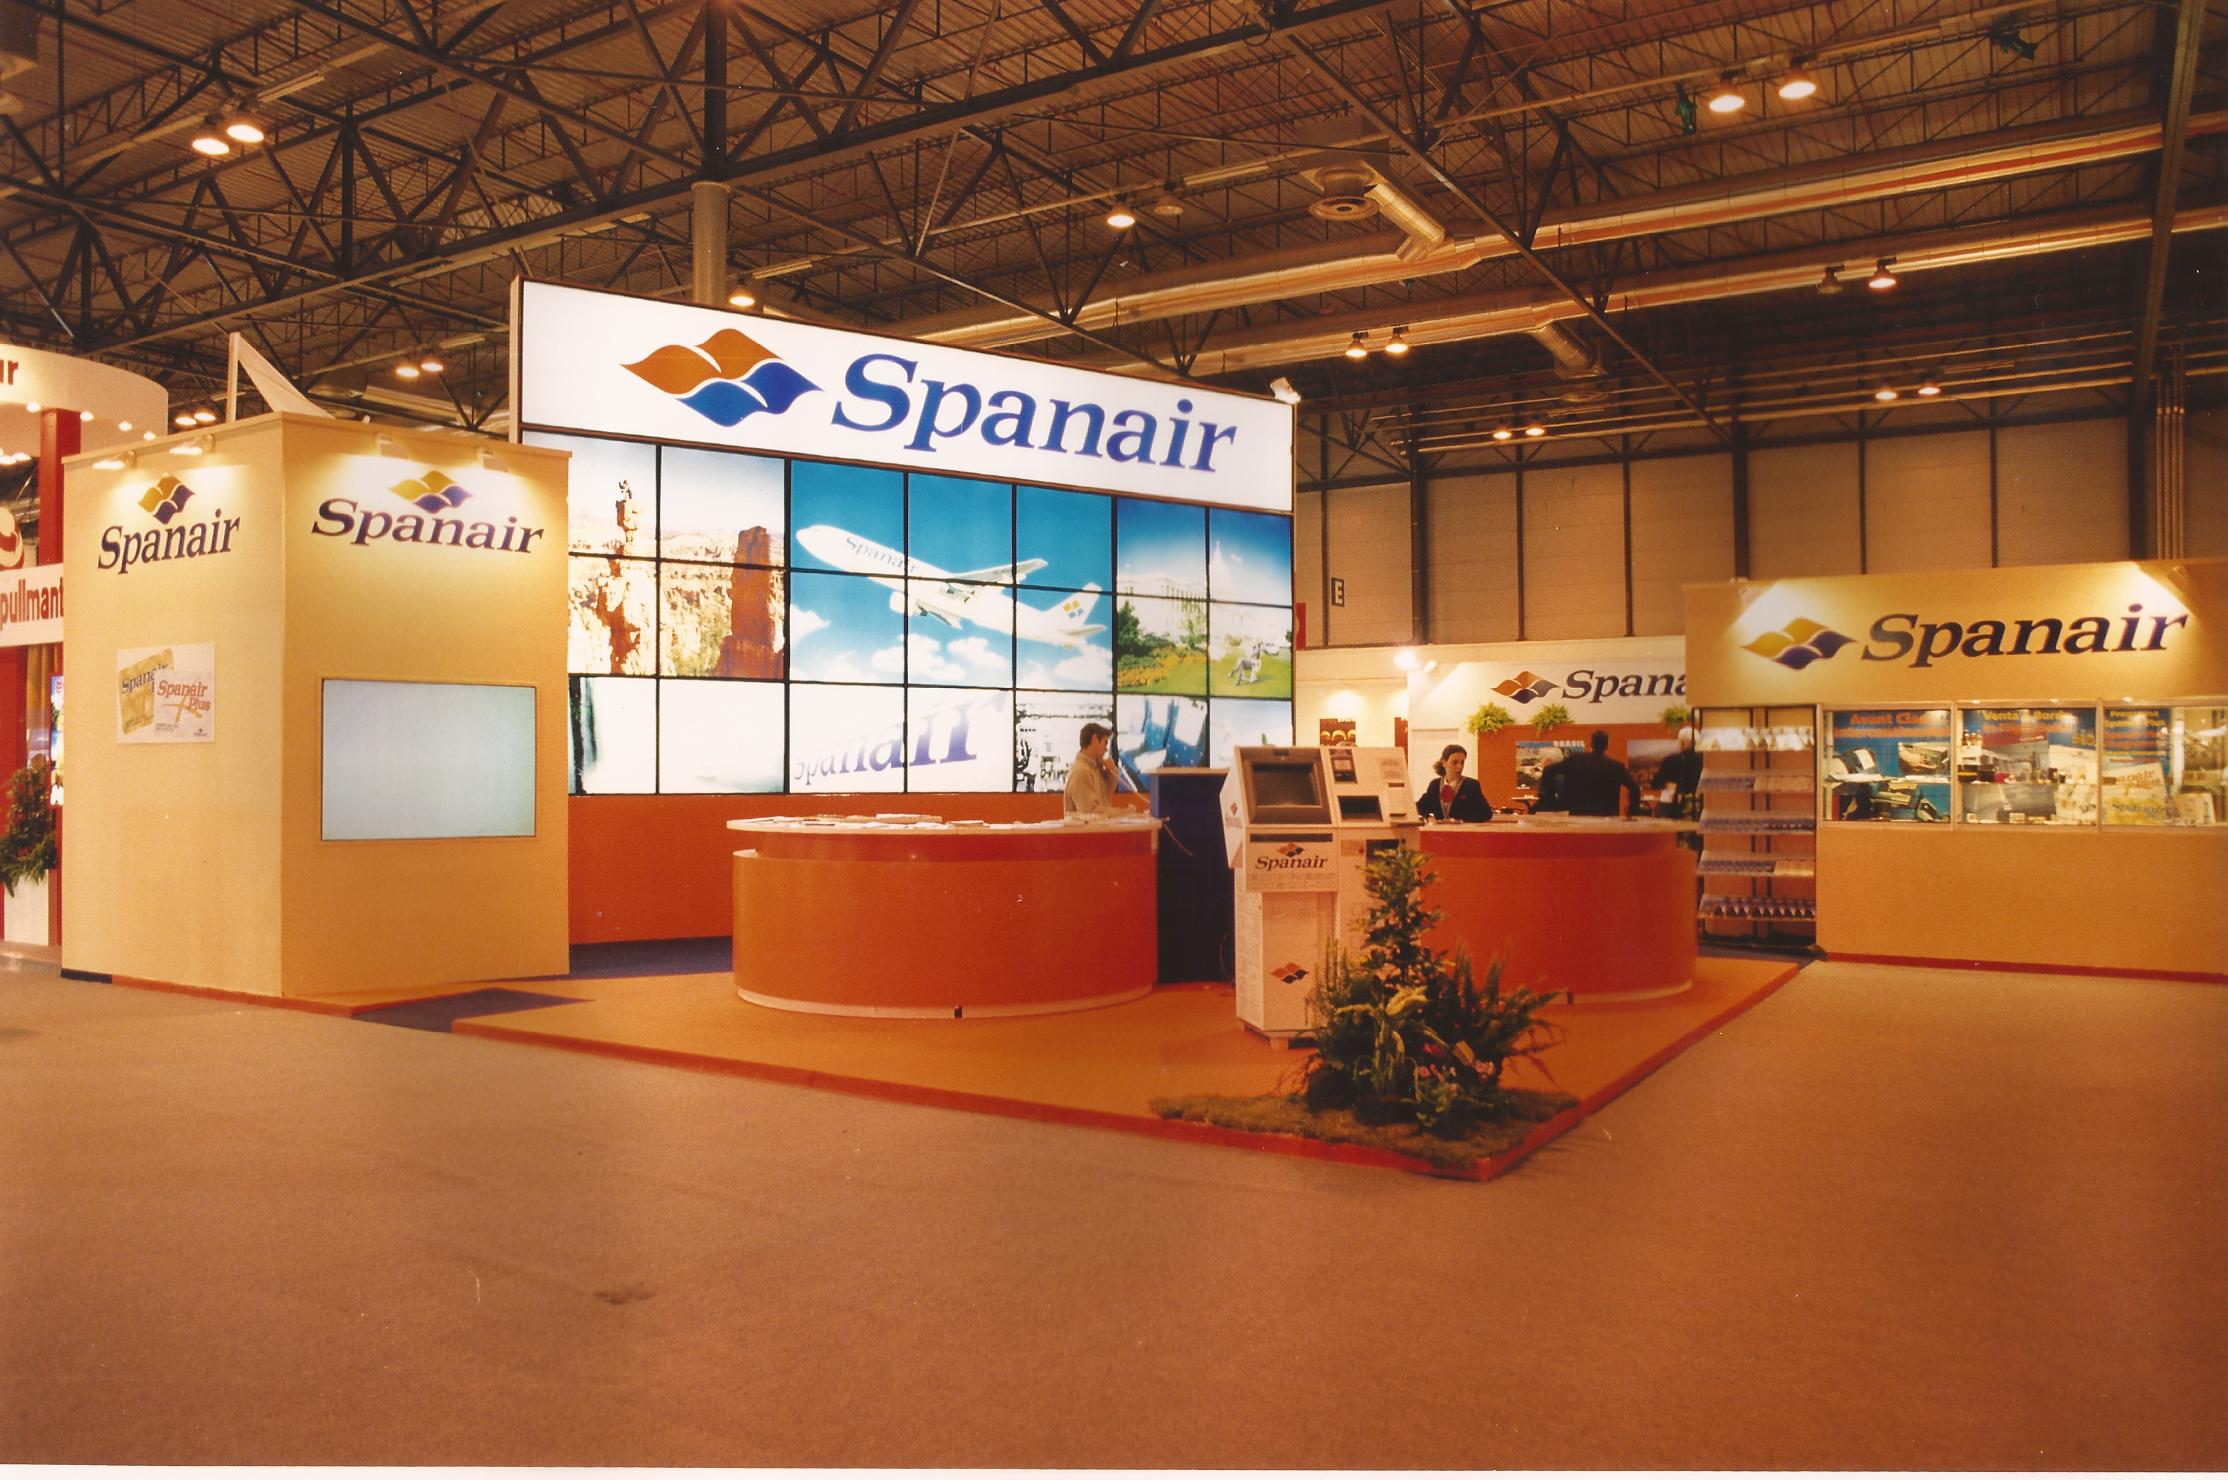 Stand for Spanair at FITUR